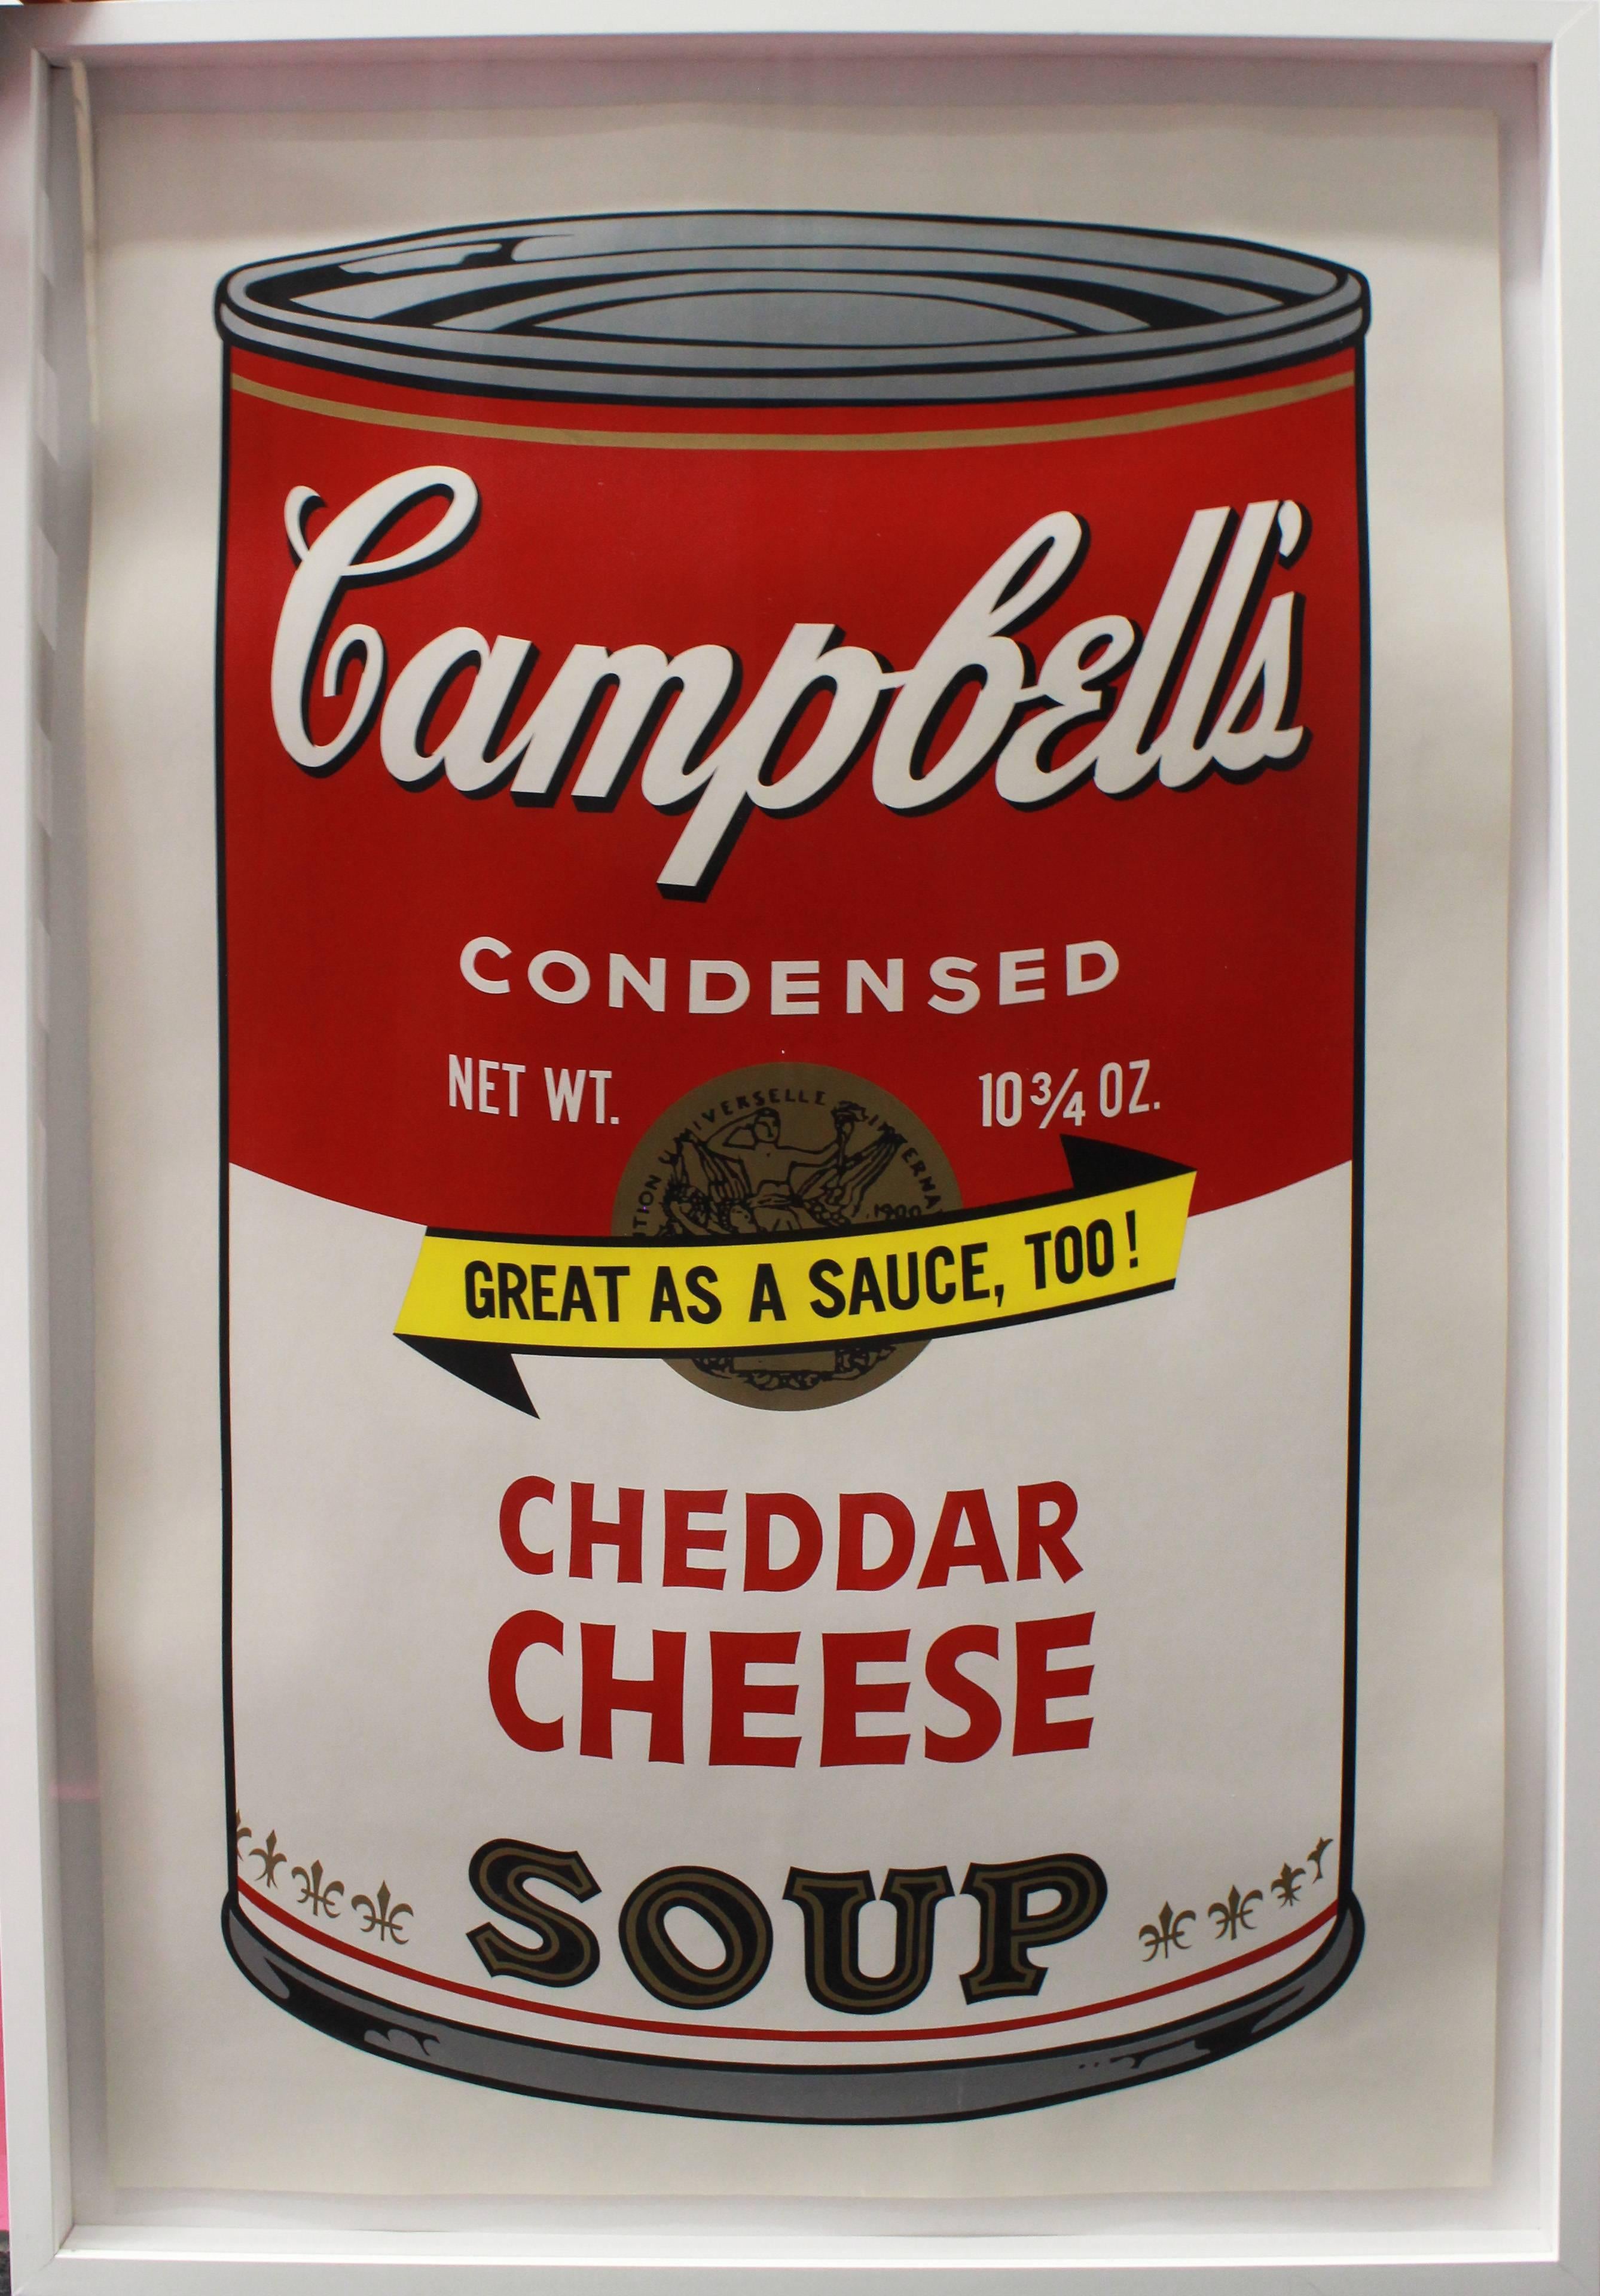 warhol campbell's soup cheddar cheese